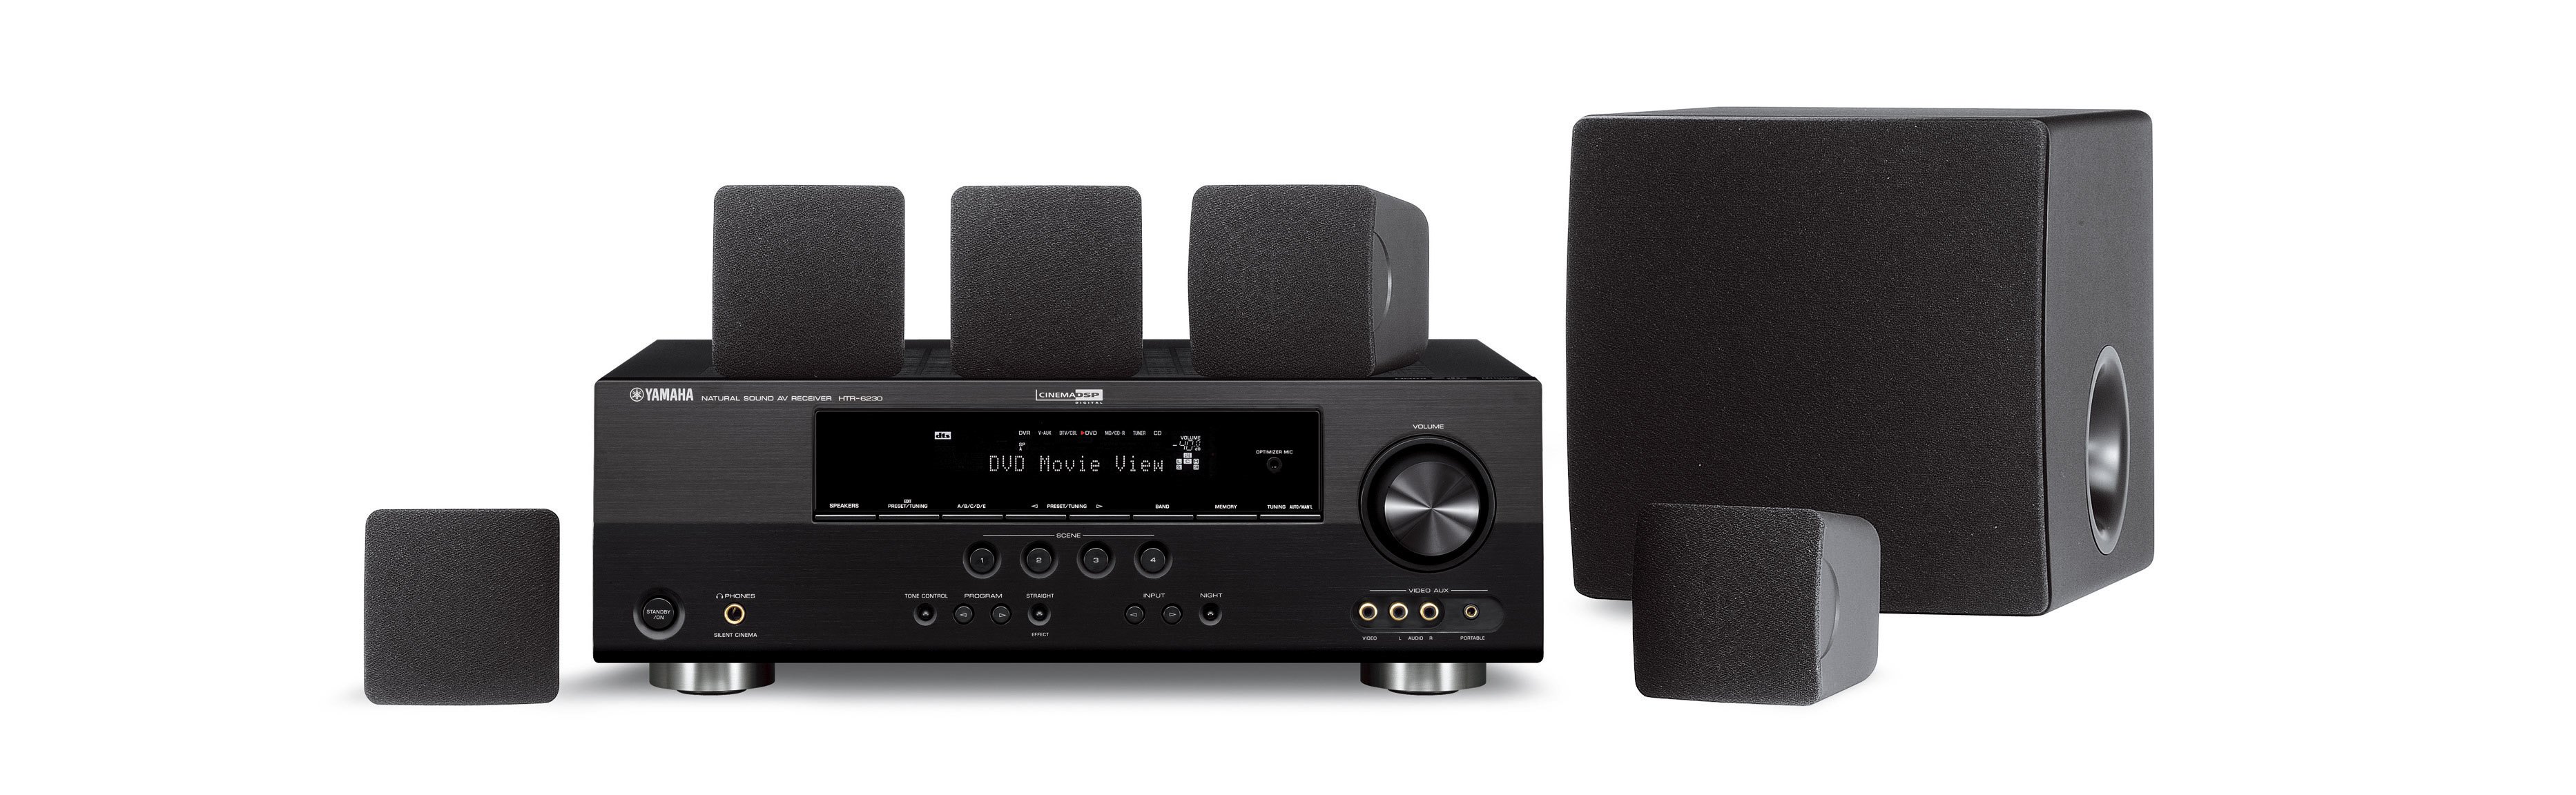 Yht 292 Overview Home Theater Systems Audio And Visual Products Yamaha Canada English